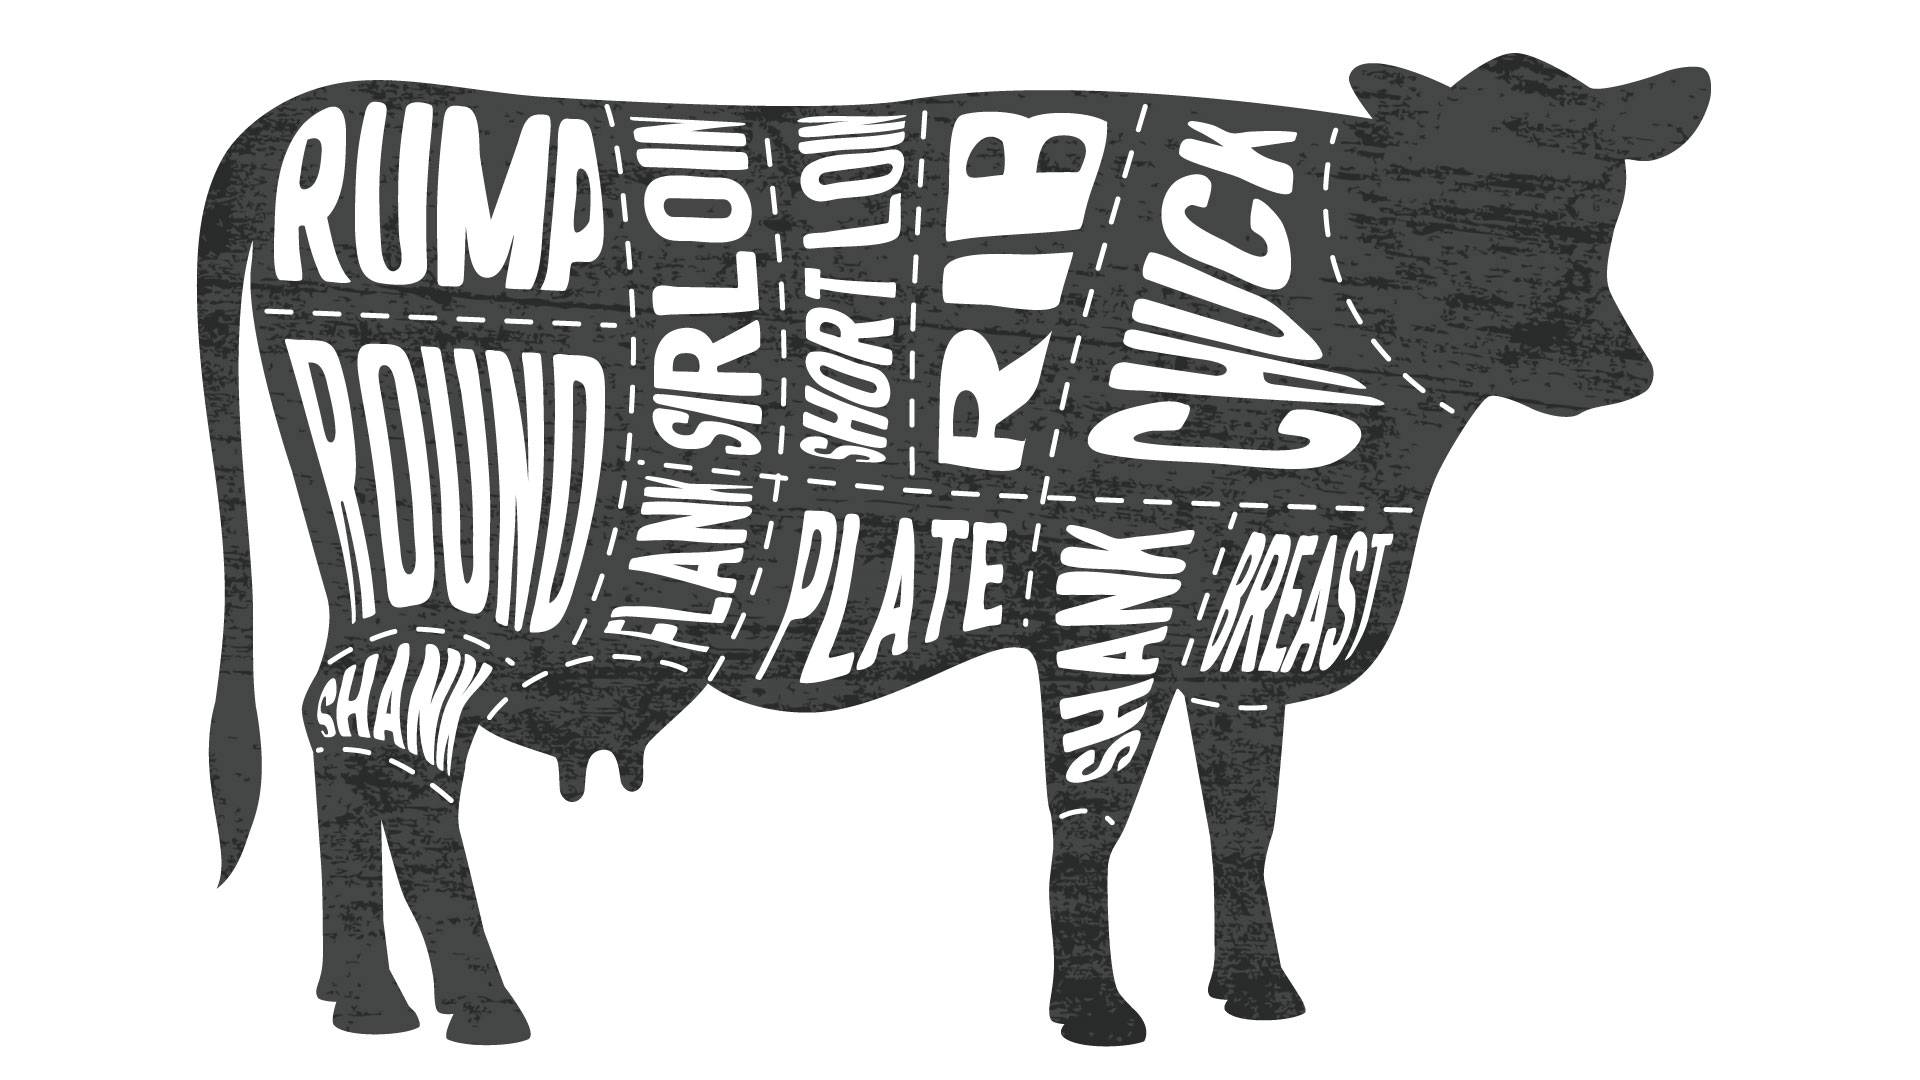 Beef cuts on a cow graphic